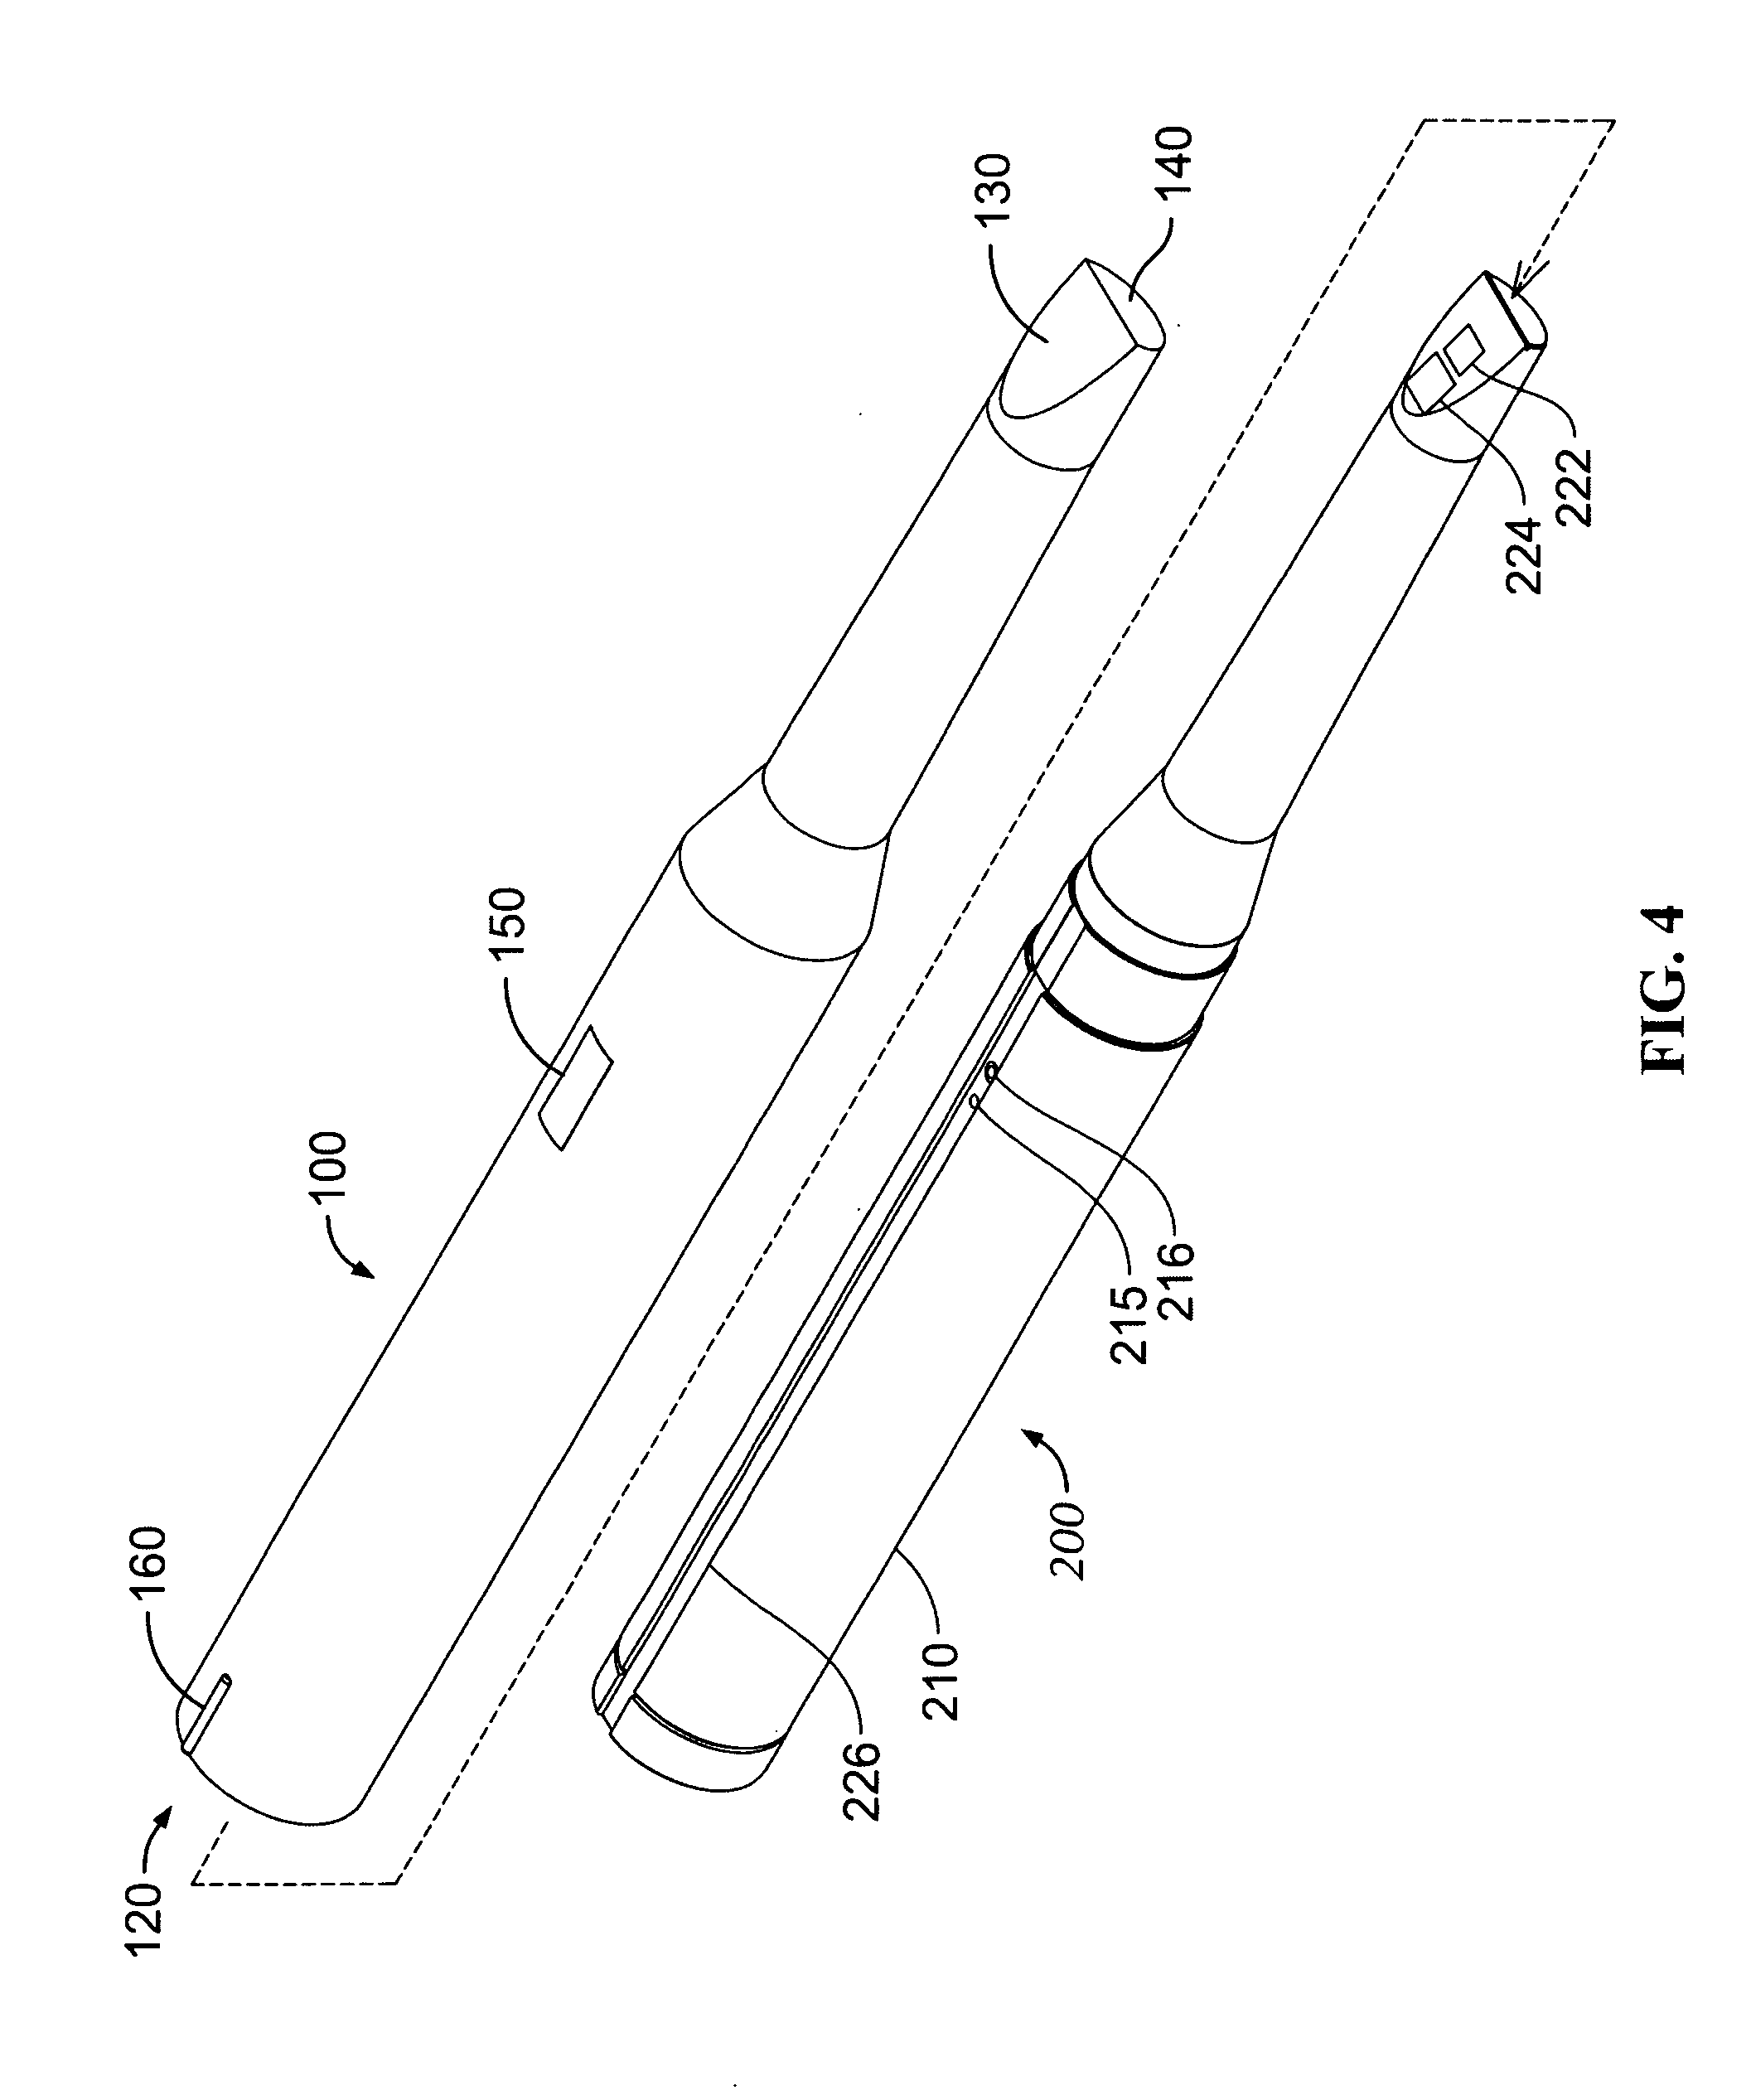 Sanitary cover sleeve for medical device with electrical contact